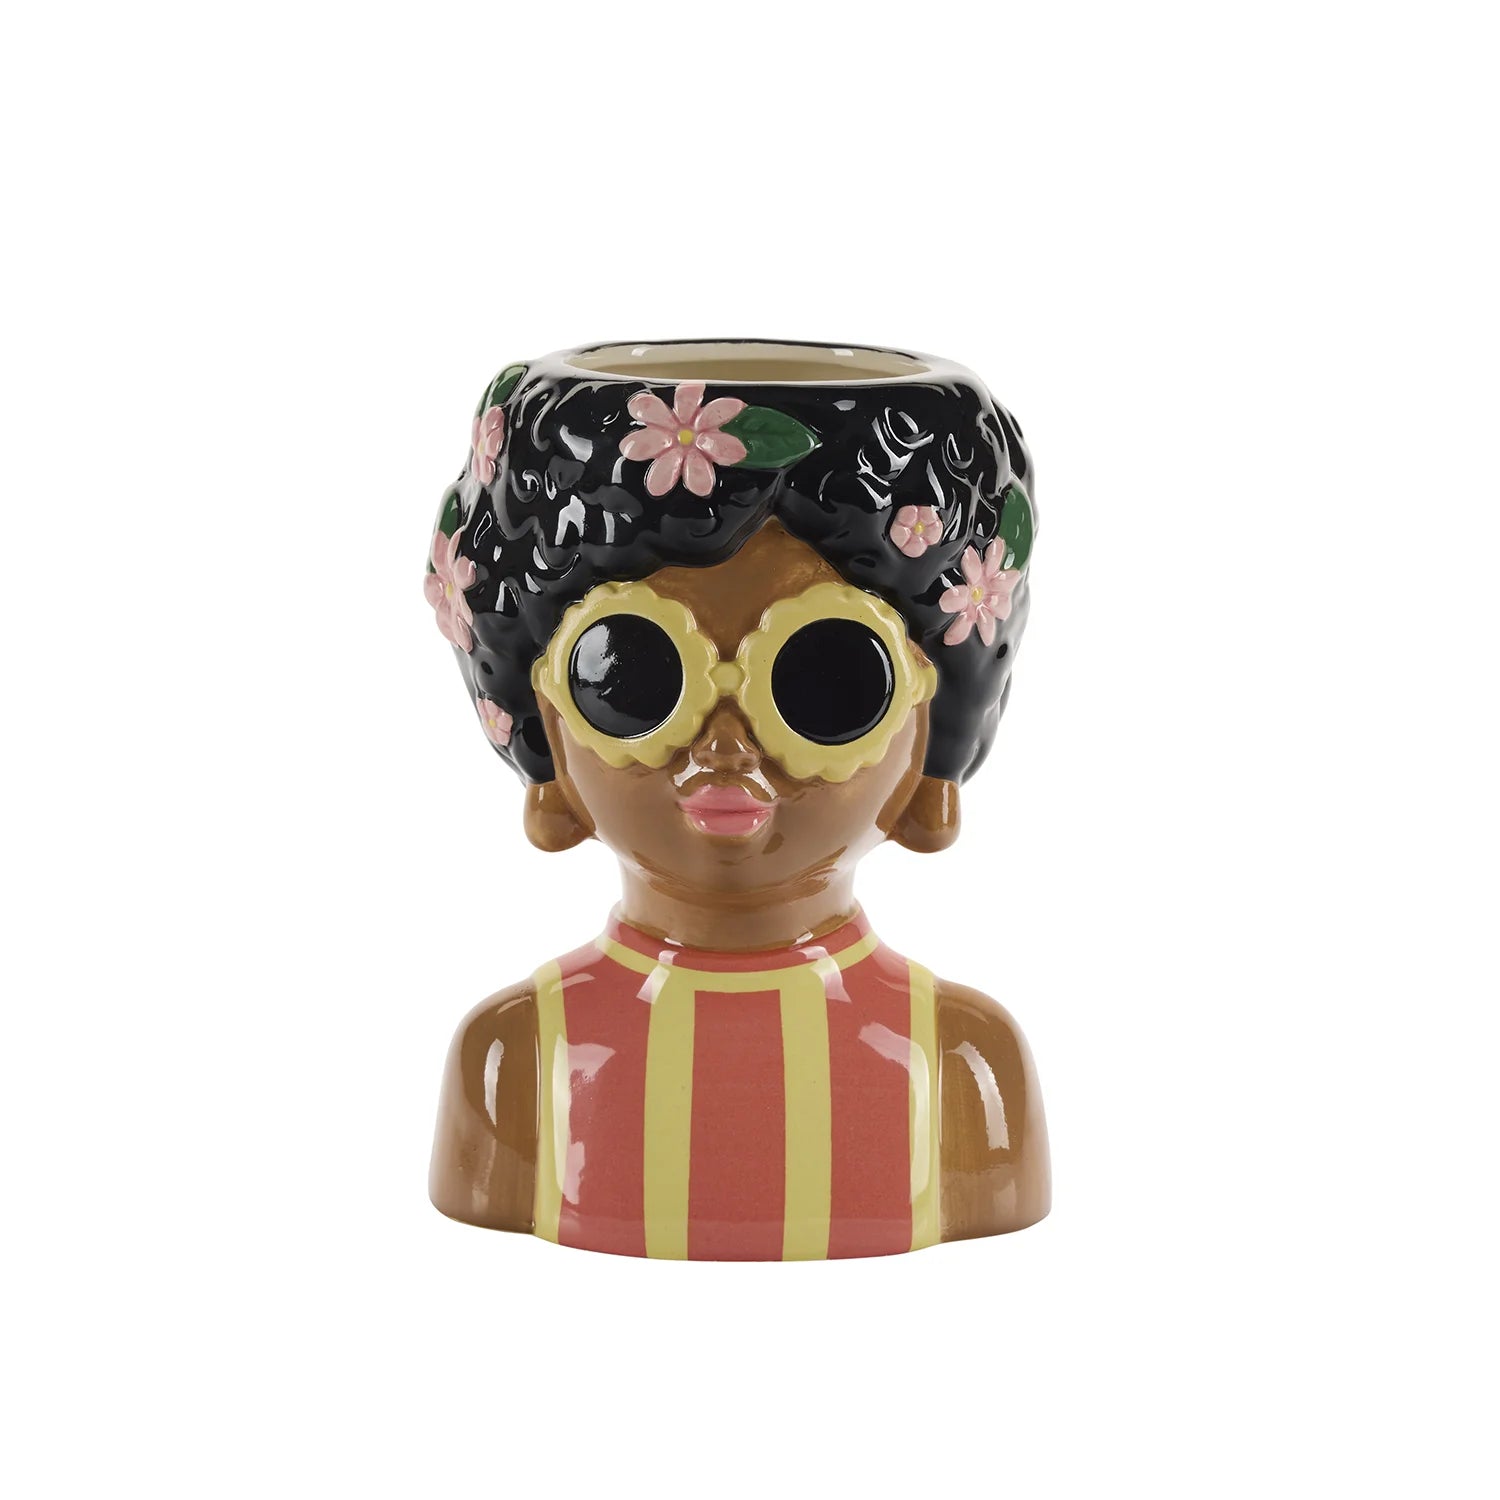 BAHNE & CO | FLOWER POT LADY WITH SUNGLASSES AND CURLED HAIR